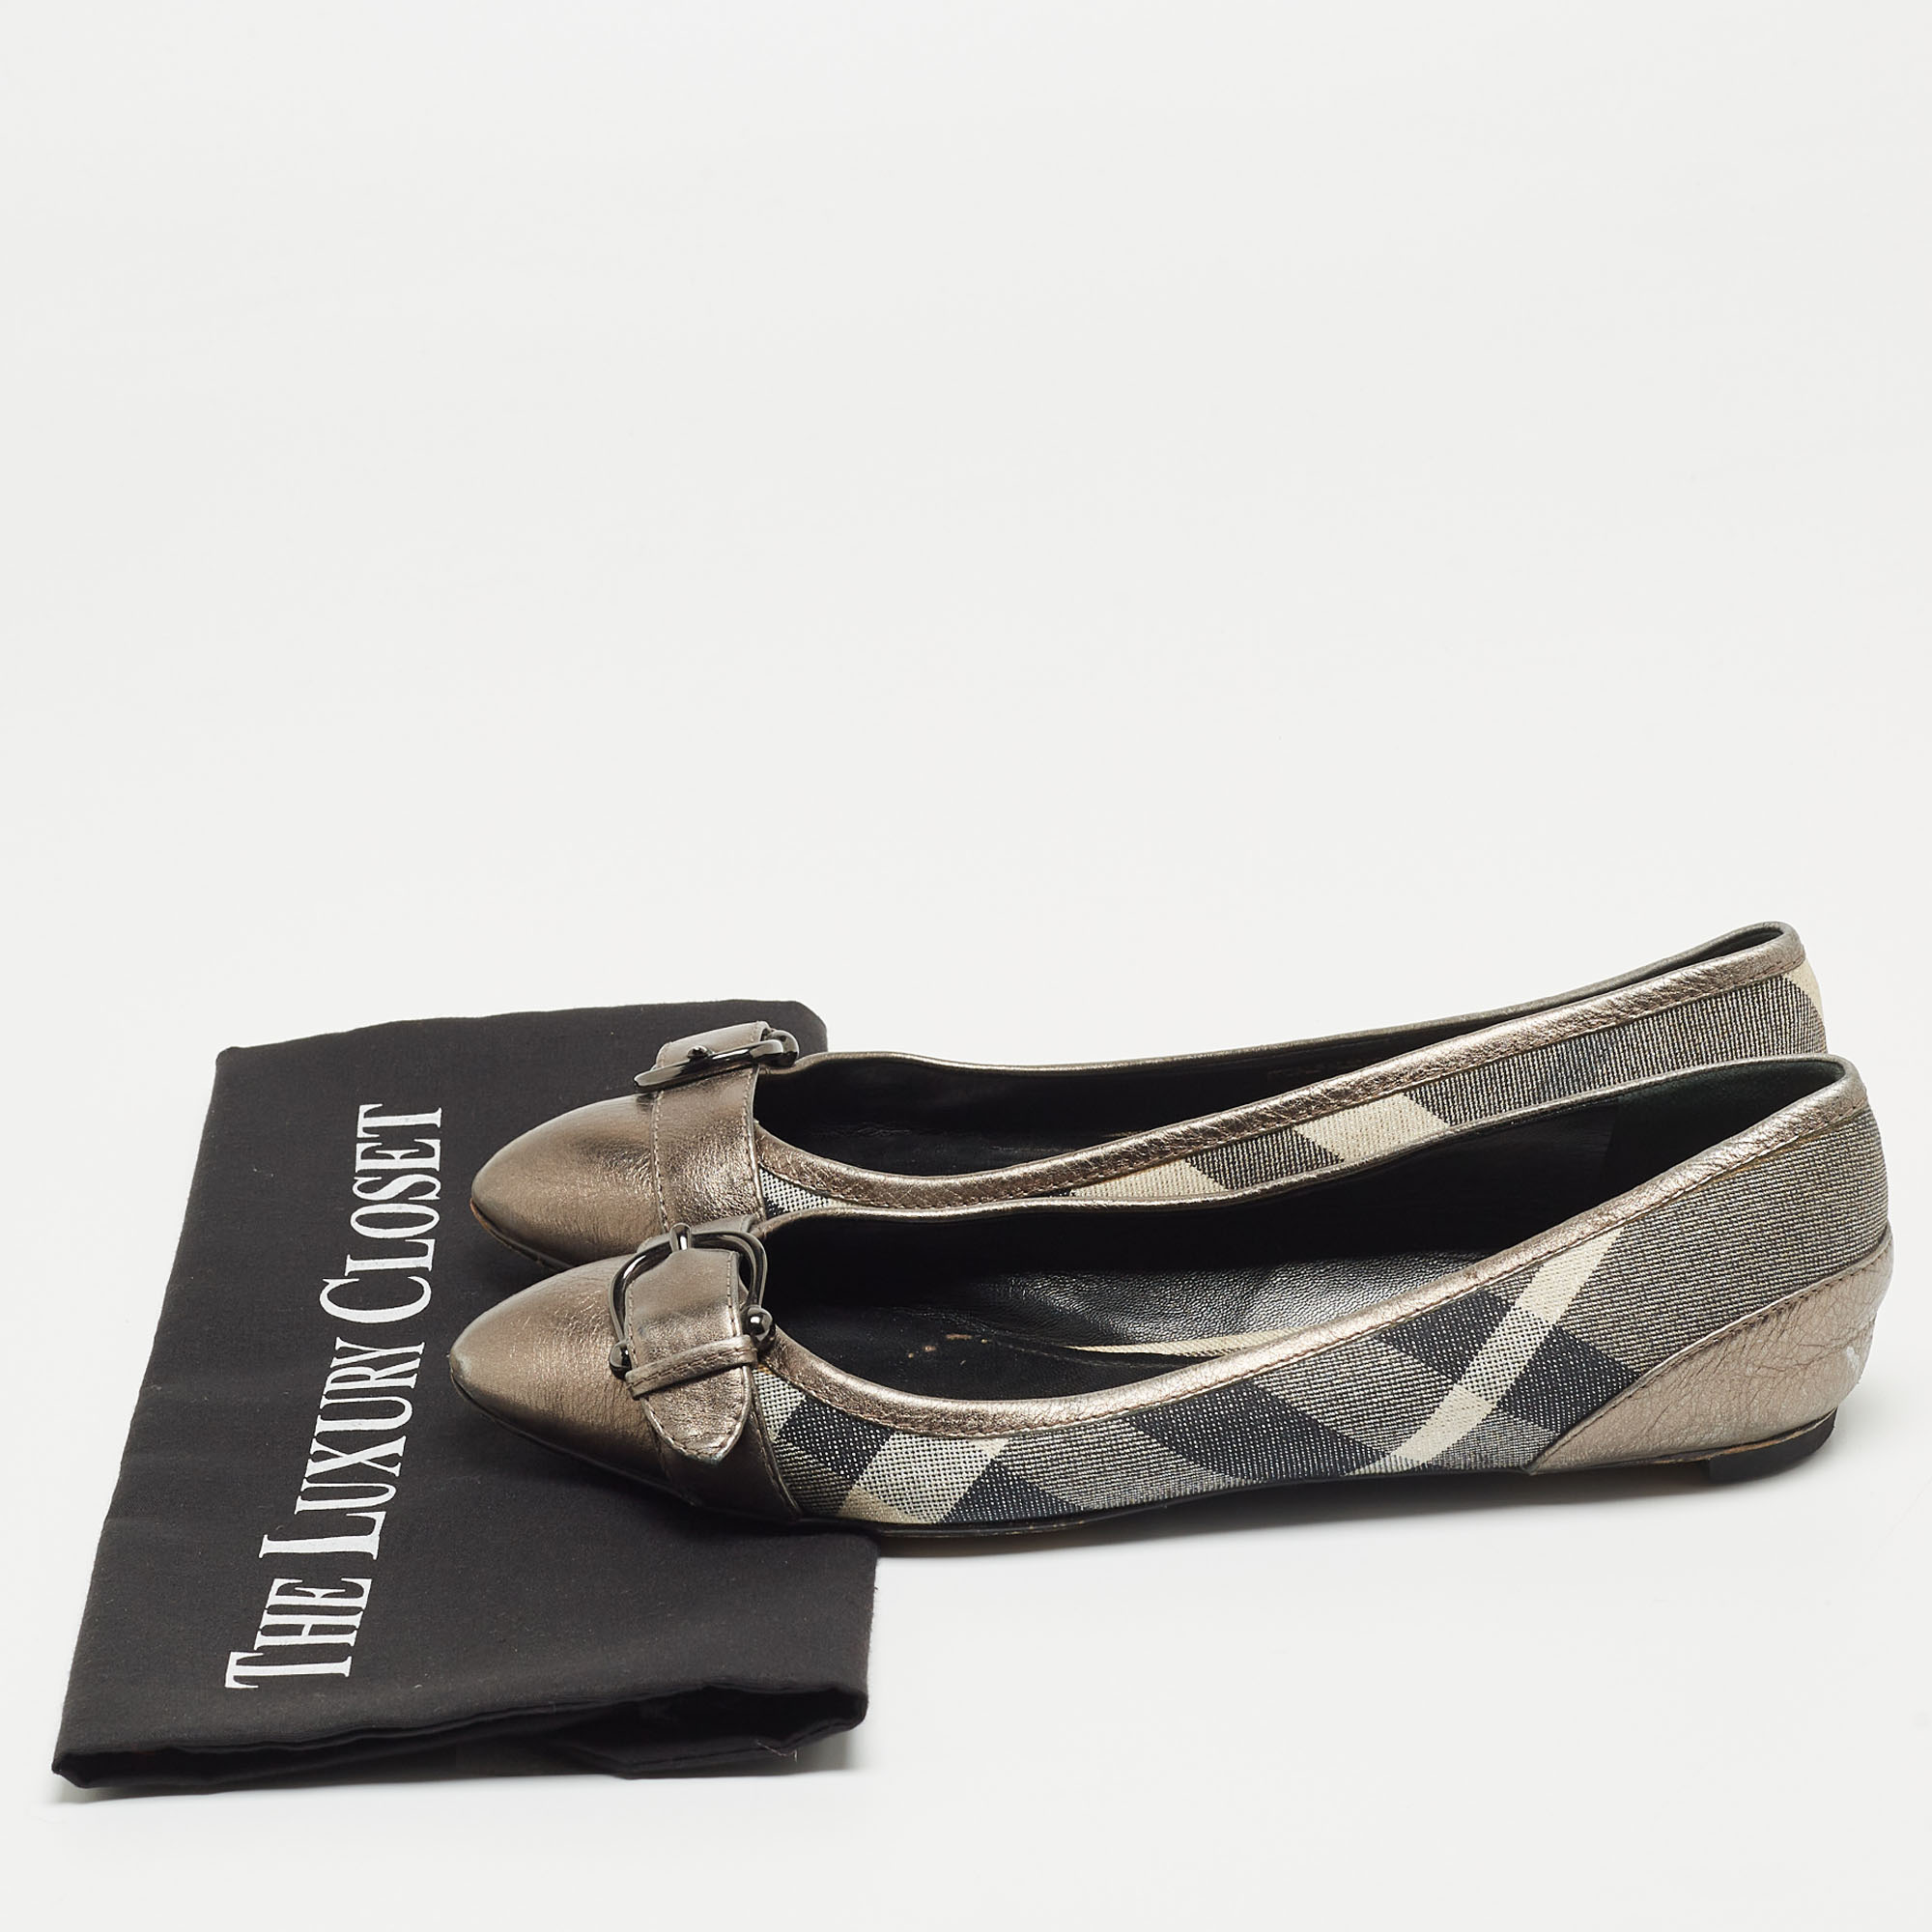 Burberry Tricolor Glitter Nova Check Canvas And Leather Ballet Flats Size 38